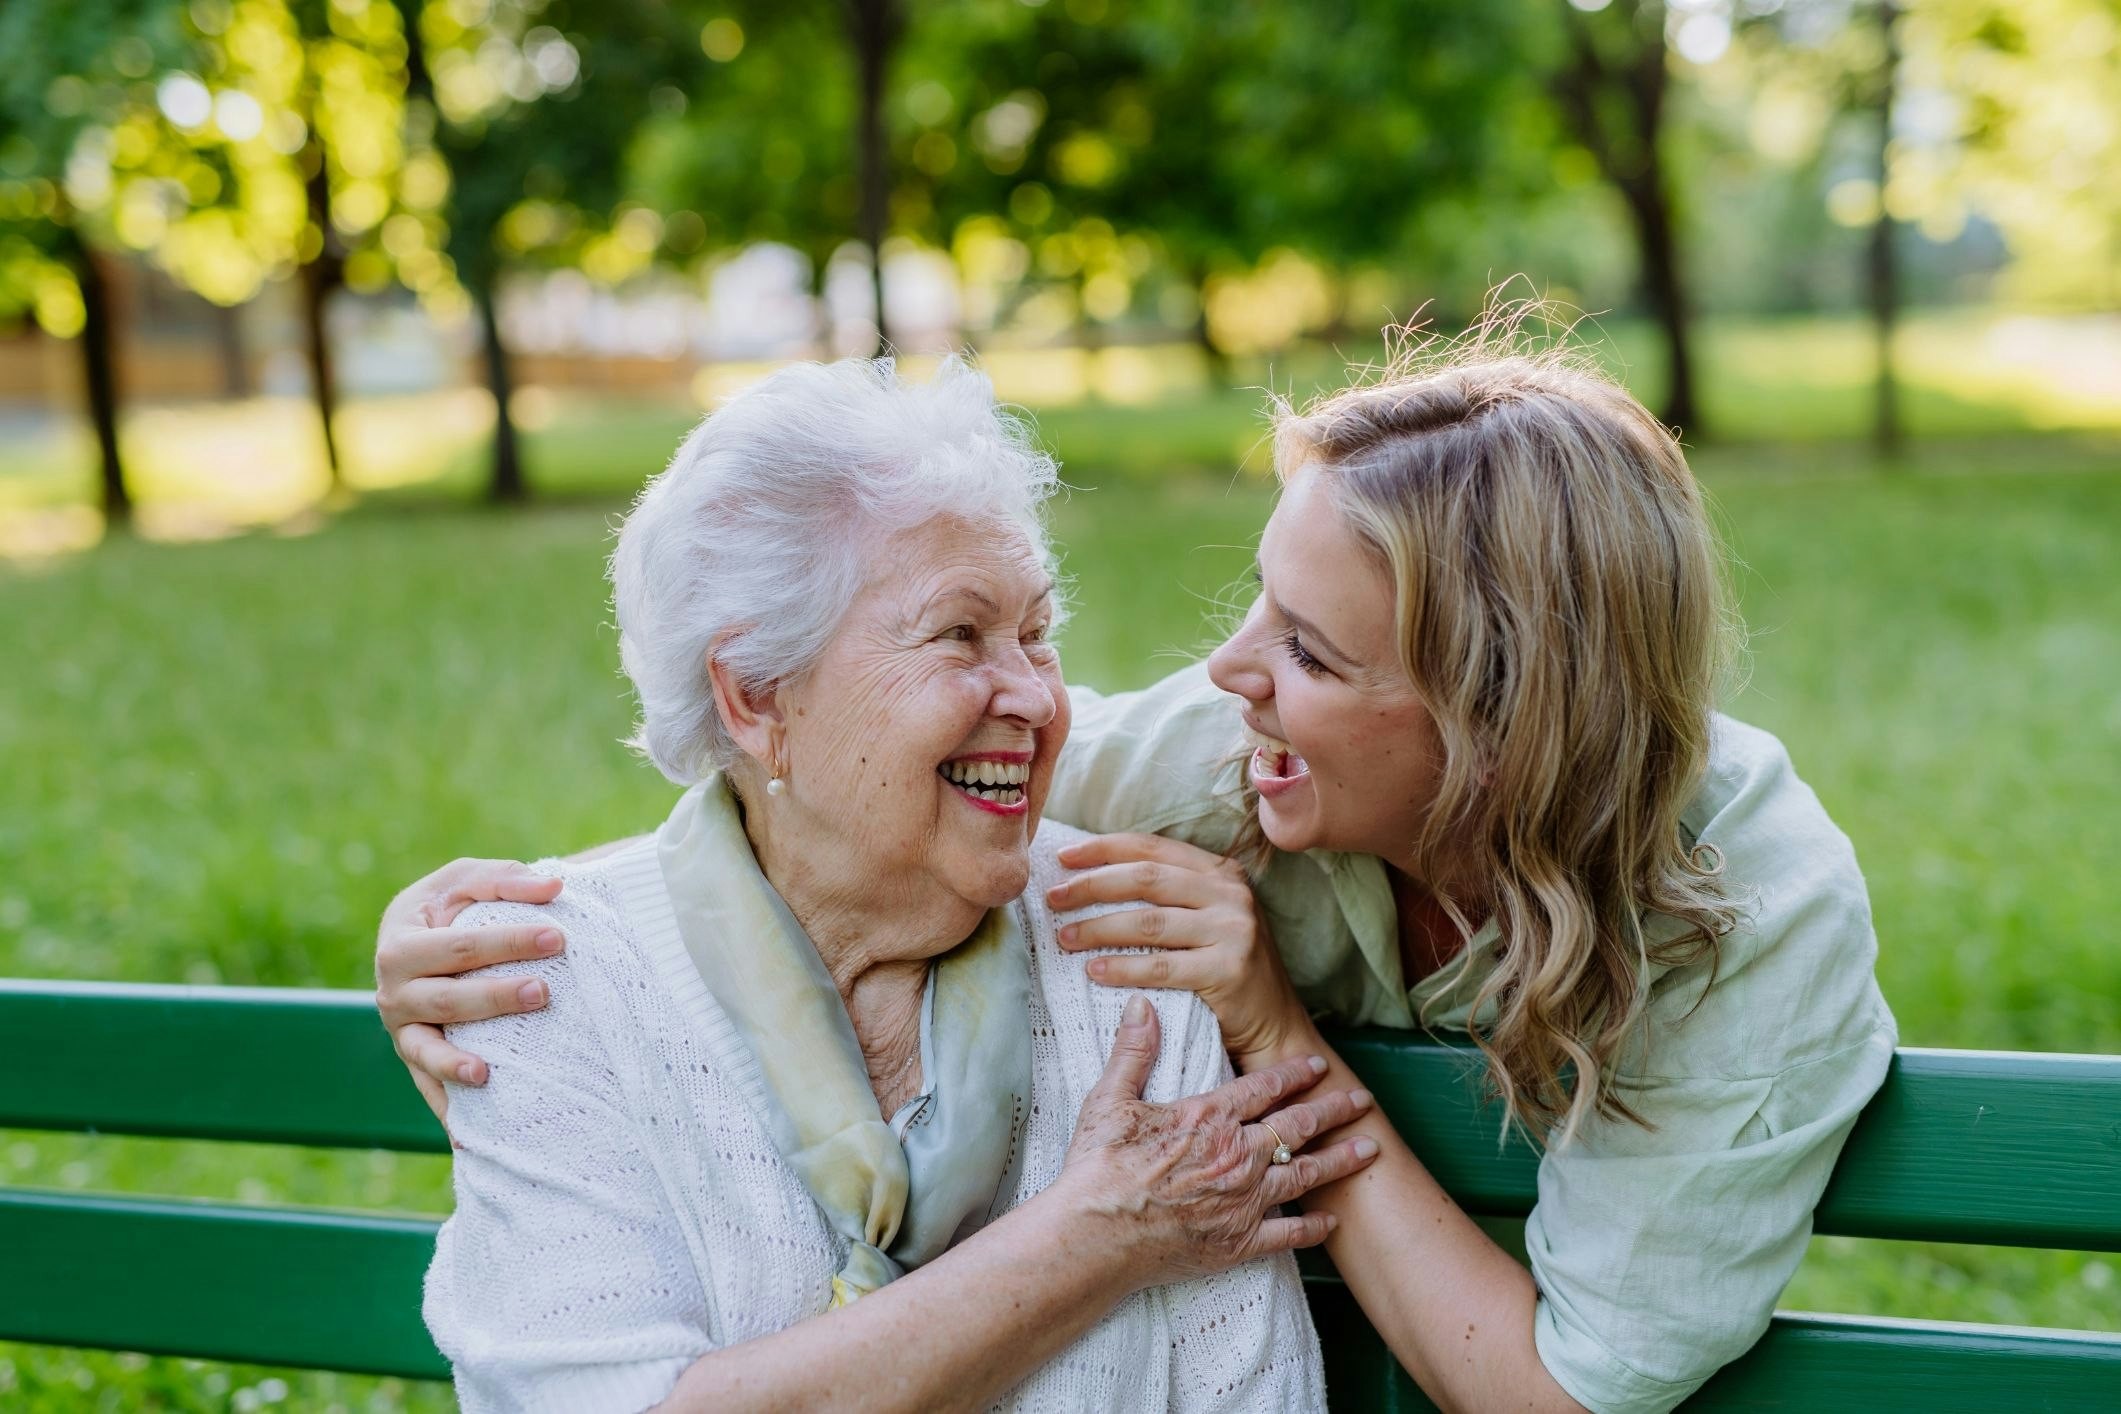 The upcoming Victoria State Budget for 2023 – 2024 is set to be delivered on Tuesday May 23, amidst uncertainty over whether a four-year funding plan for respite care will continue or be cut off. (Source: Shutterstock)
